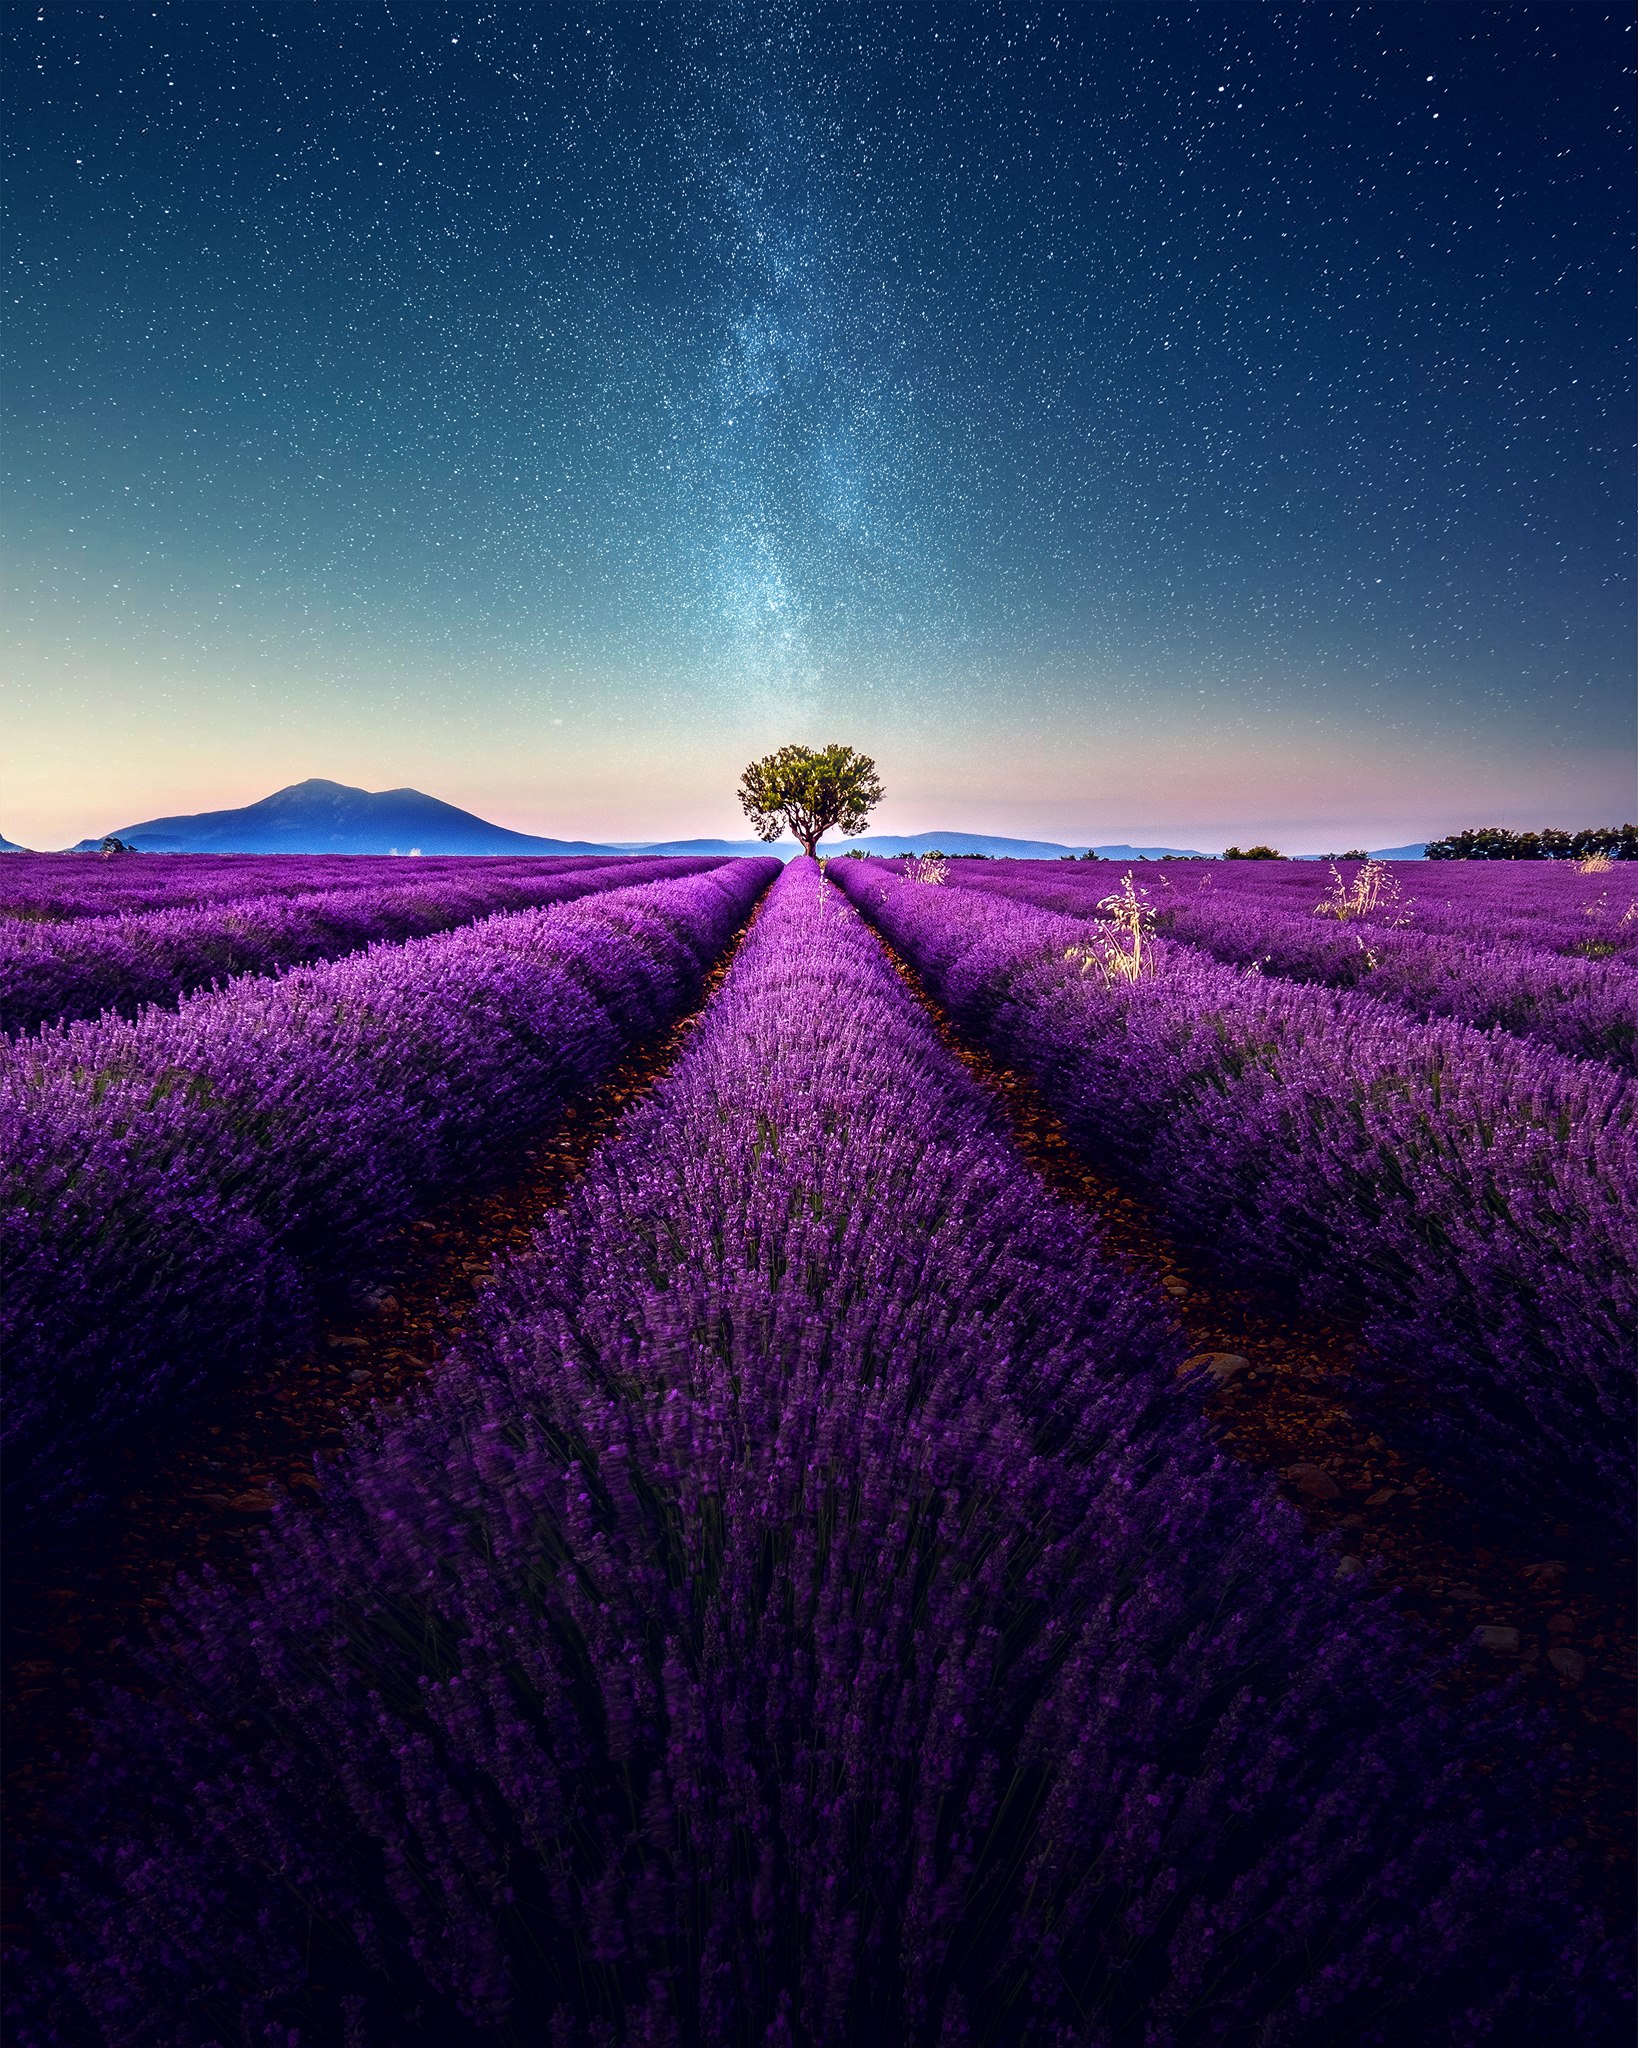 Lavender field under the Milky Way | Today's Image | EarthSky